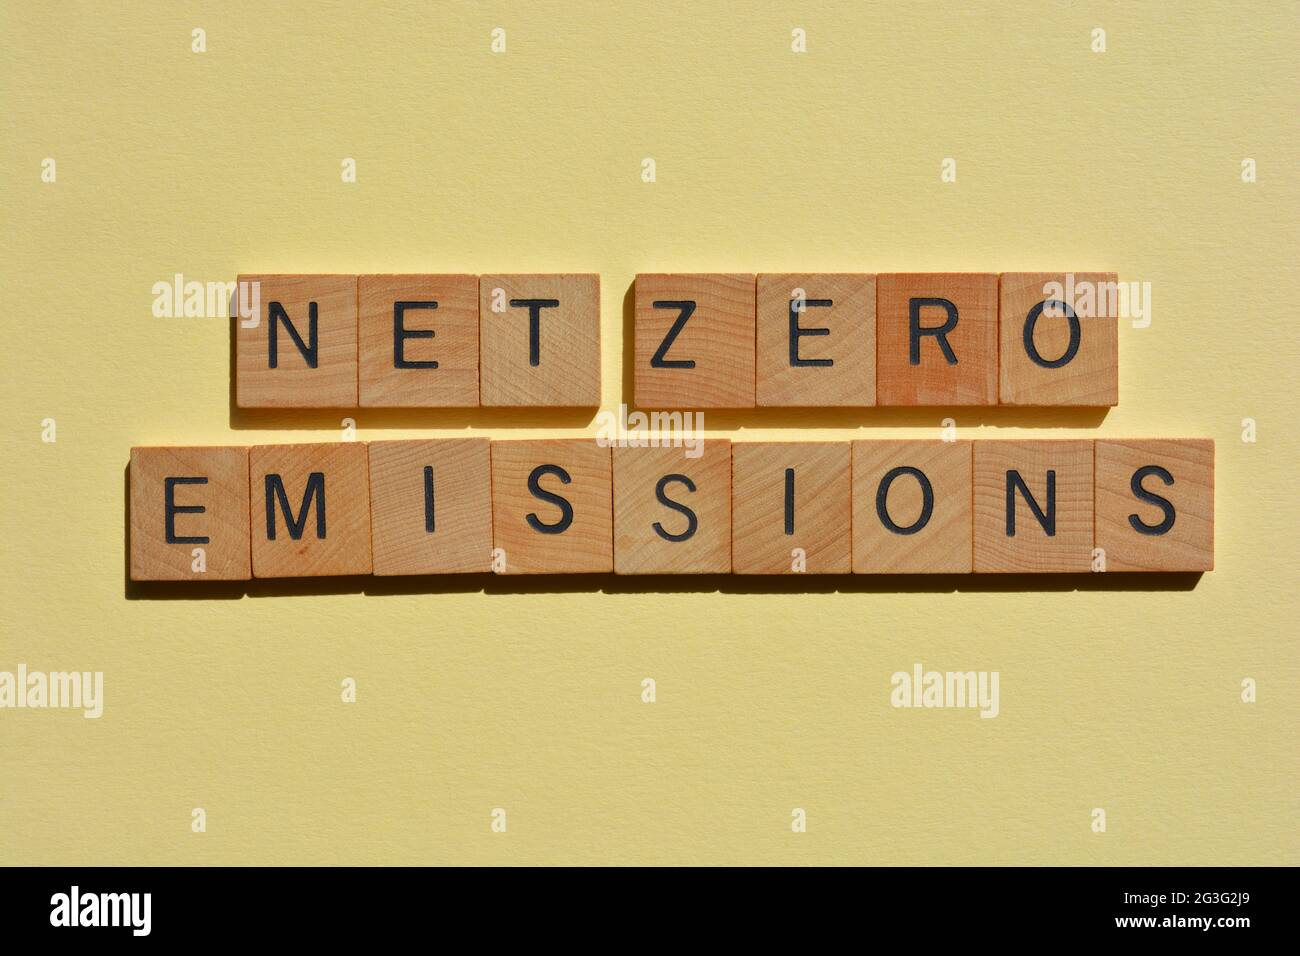 Net Zero Emissions, phrase in wooden alphabet letters isolated on plain background Stock Photo